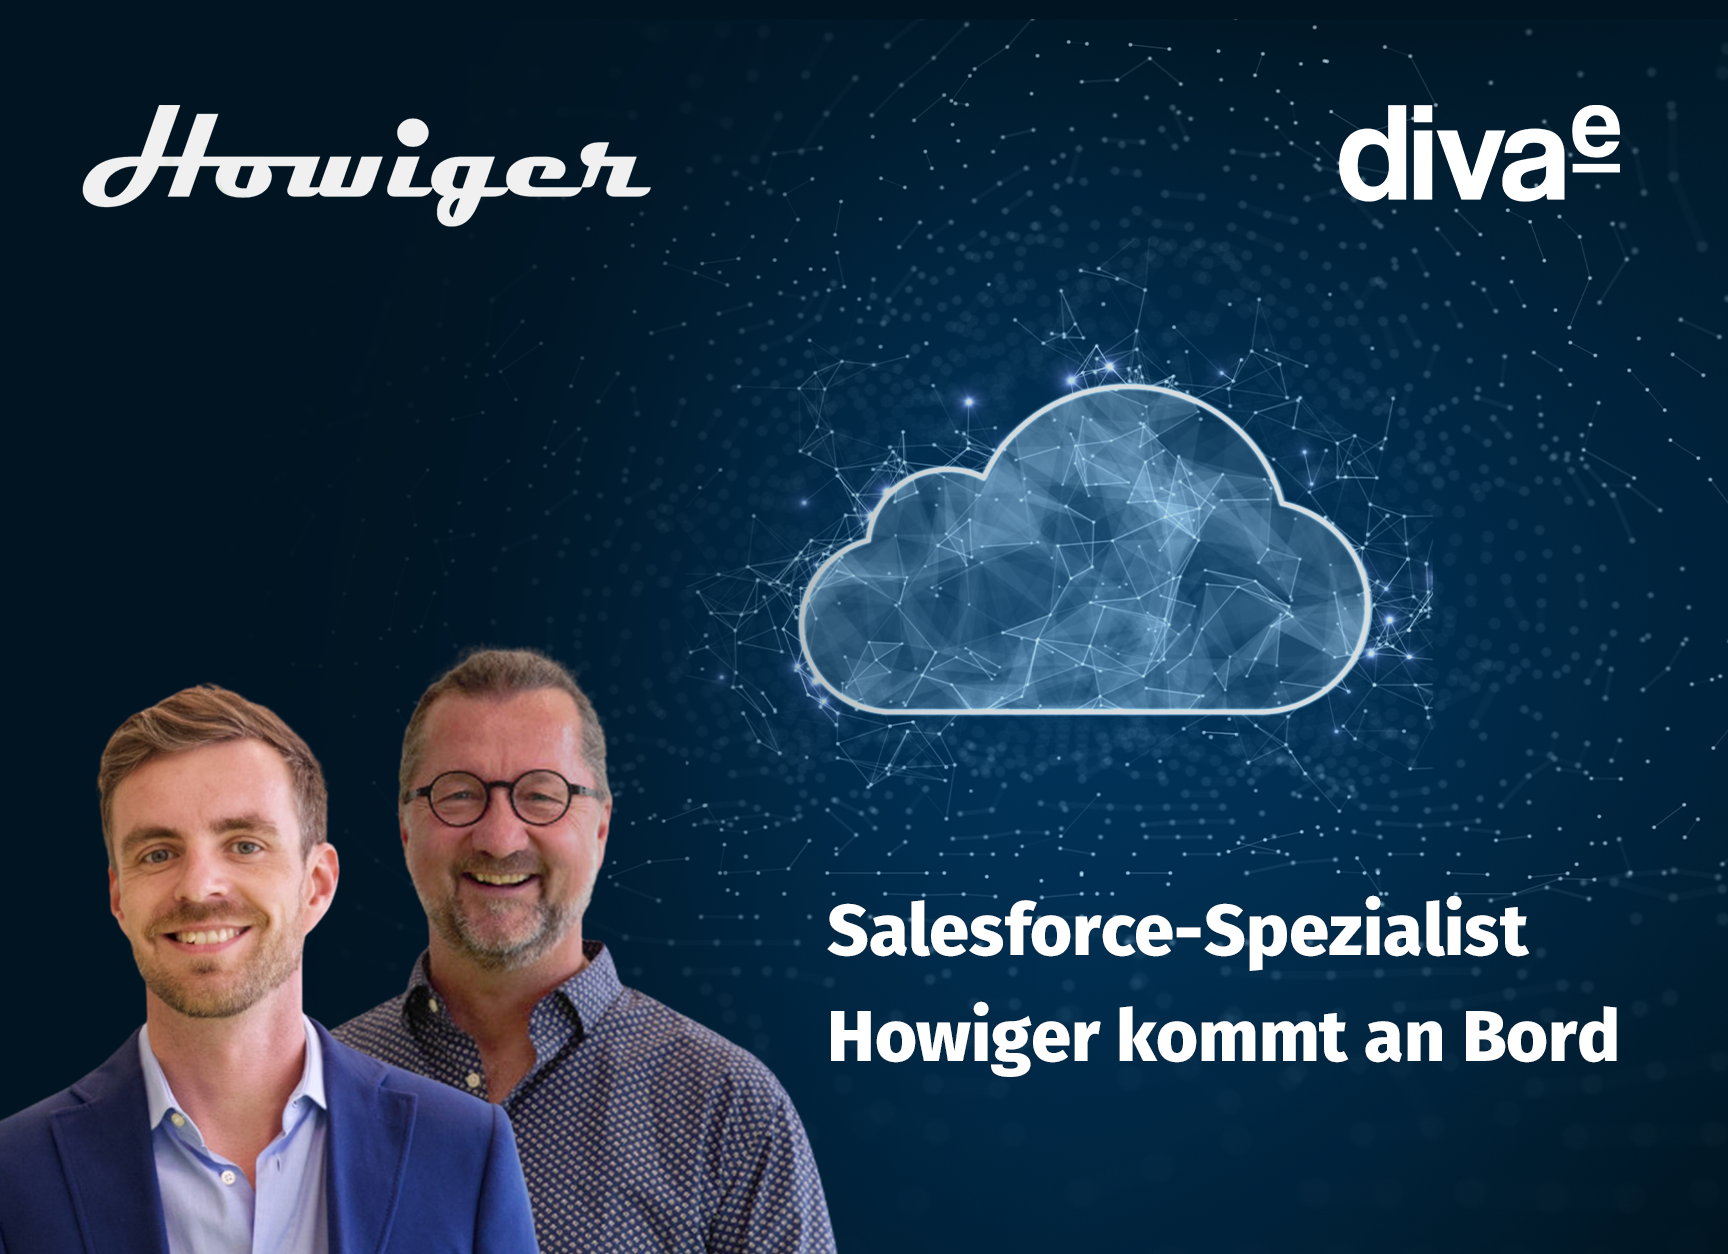 diva-e grows to 800 employees and acquires Salesforce specialists